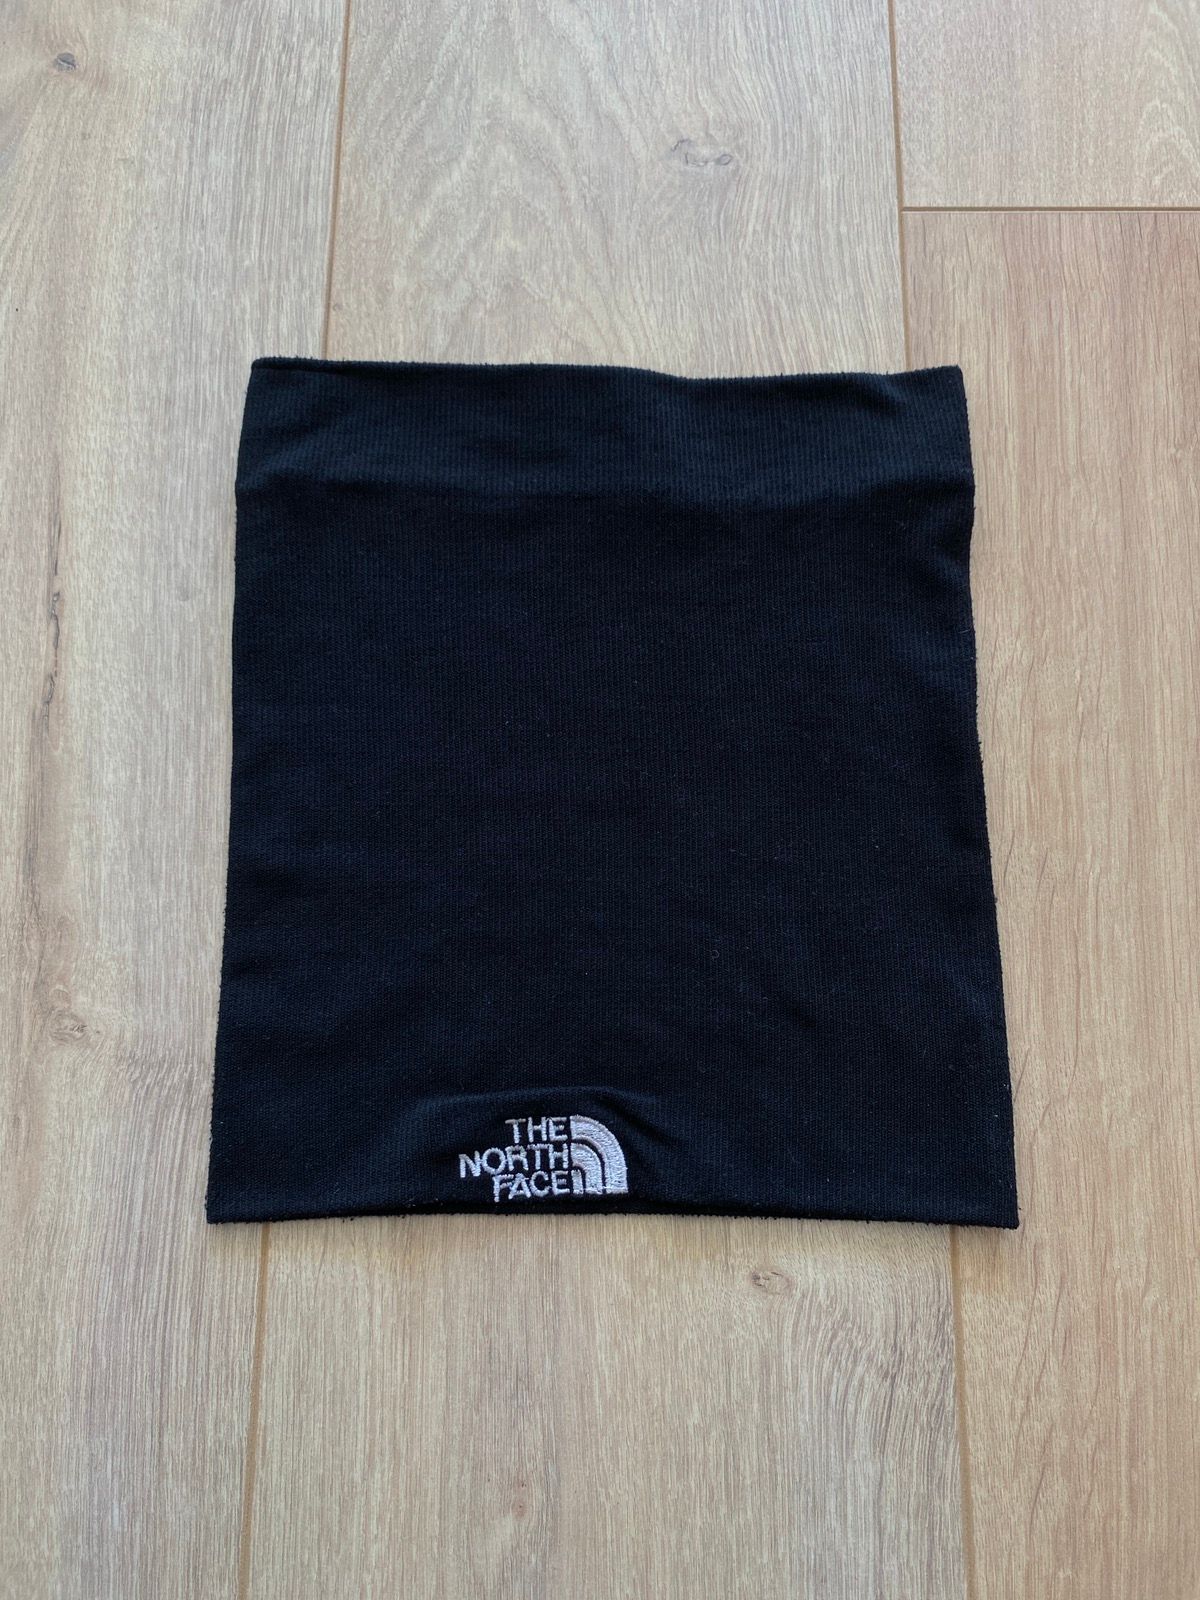 The North Face The North Face Tnf Neck Warmer Scarf Mask | Grailed